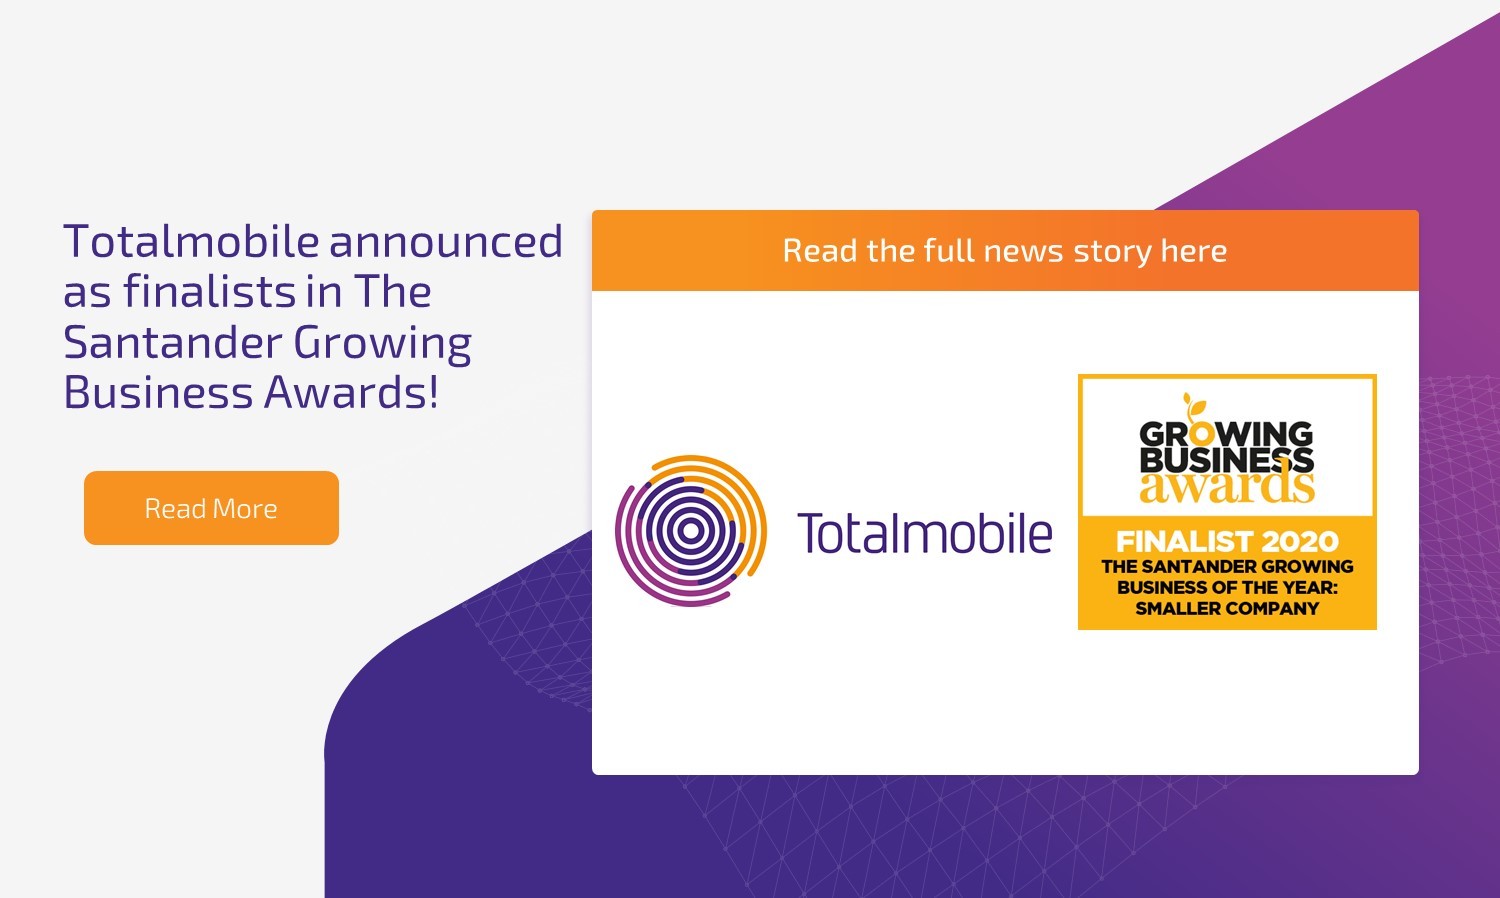 Totalmobile announced as finalists in The Santander Growing Business of the Year Awards